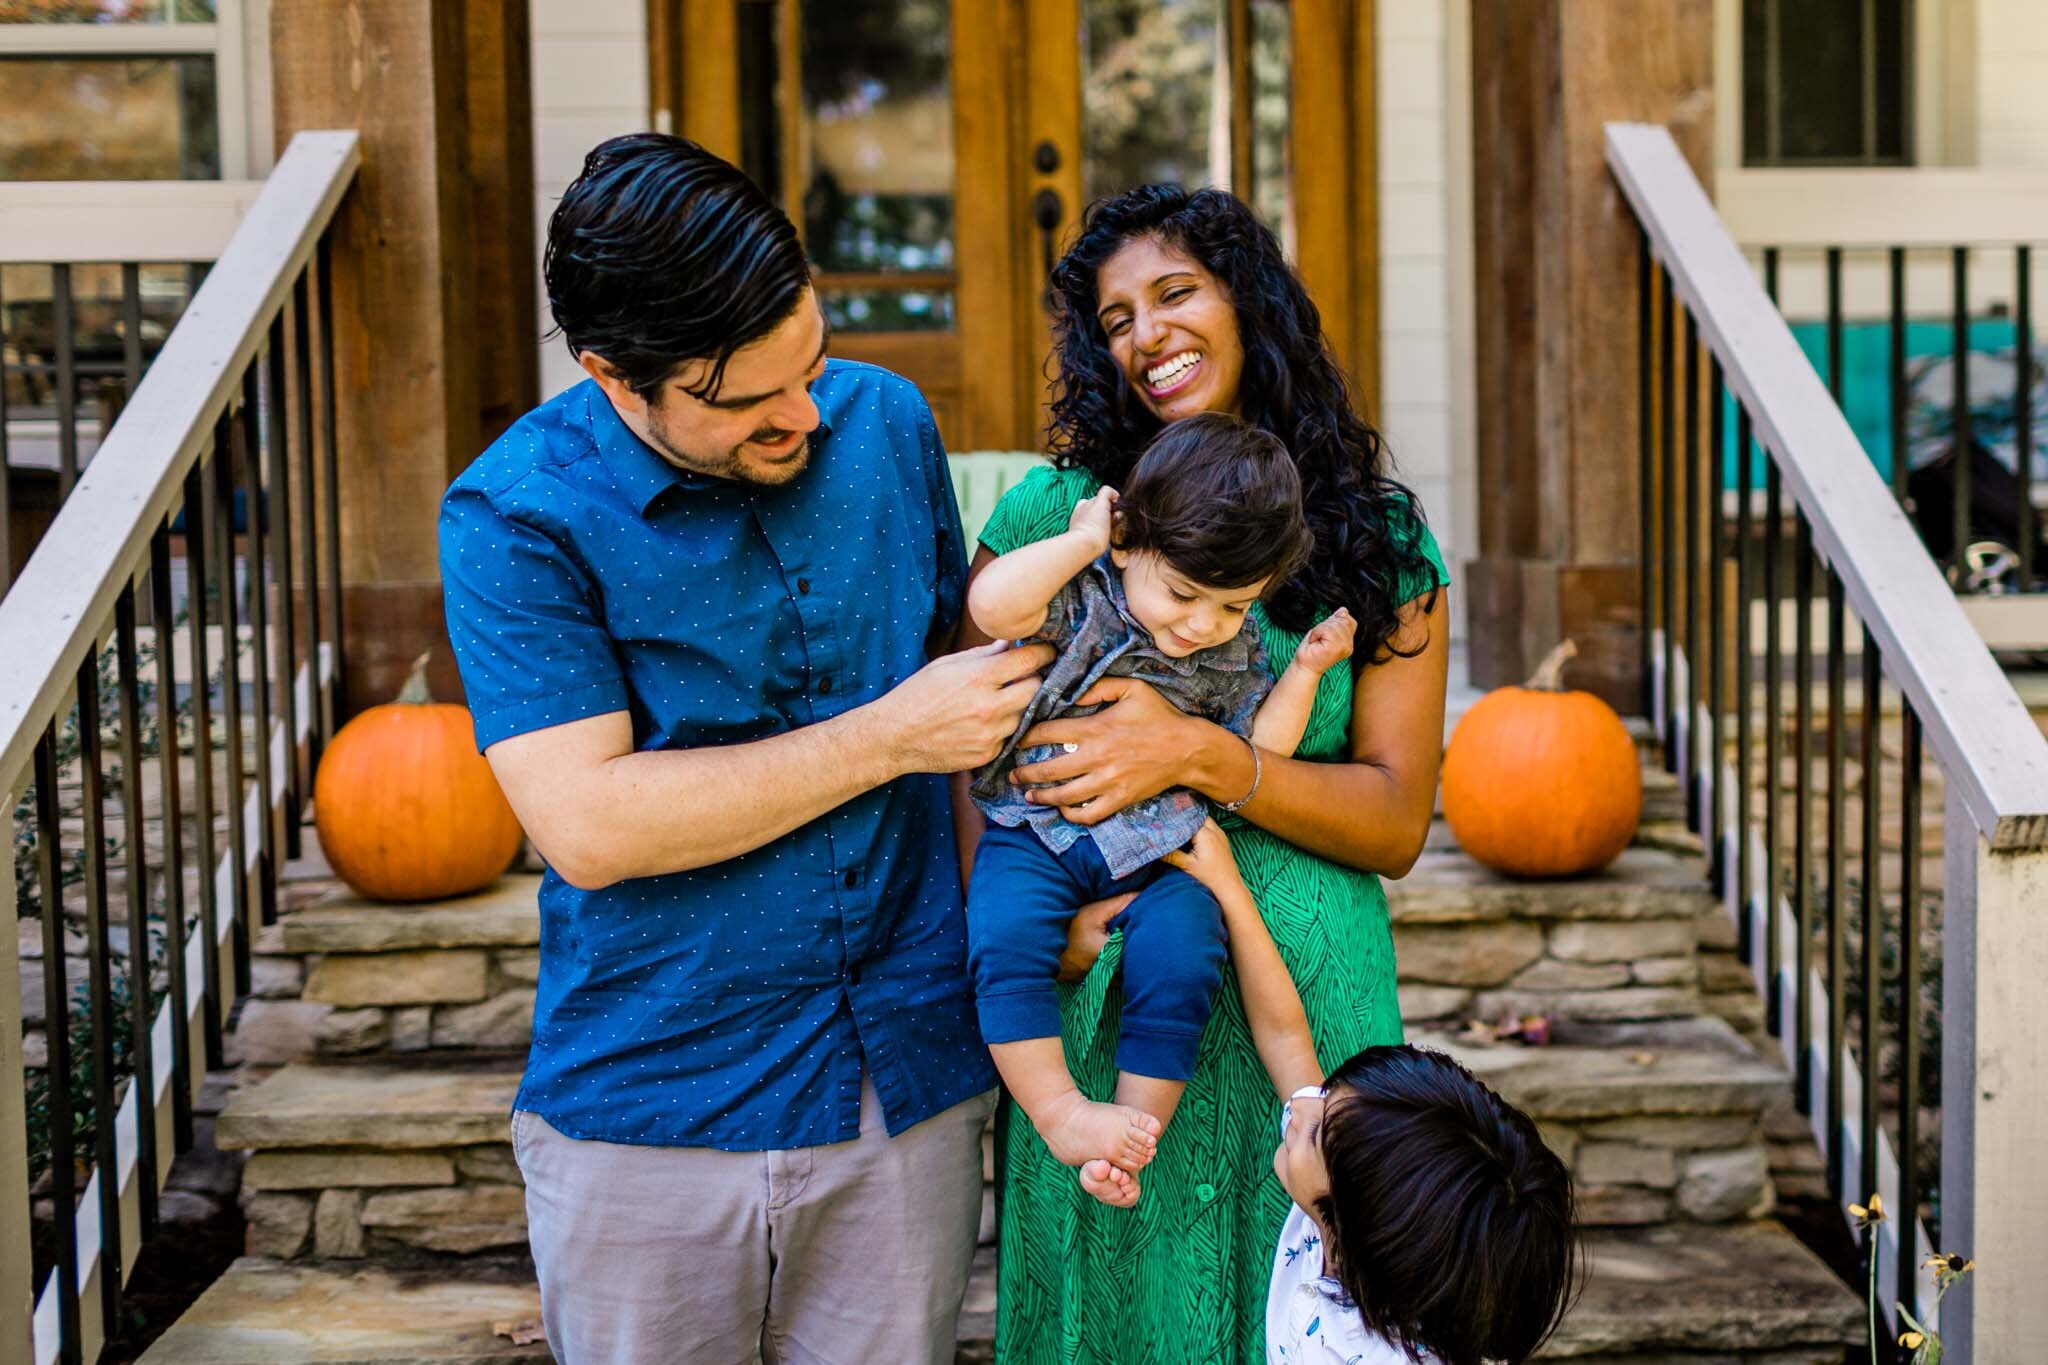 Durham Family Photographer | By G. Lin Photography | Candid family photo laughing together